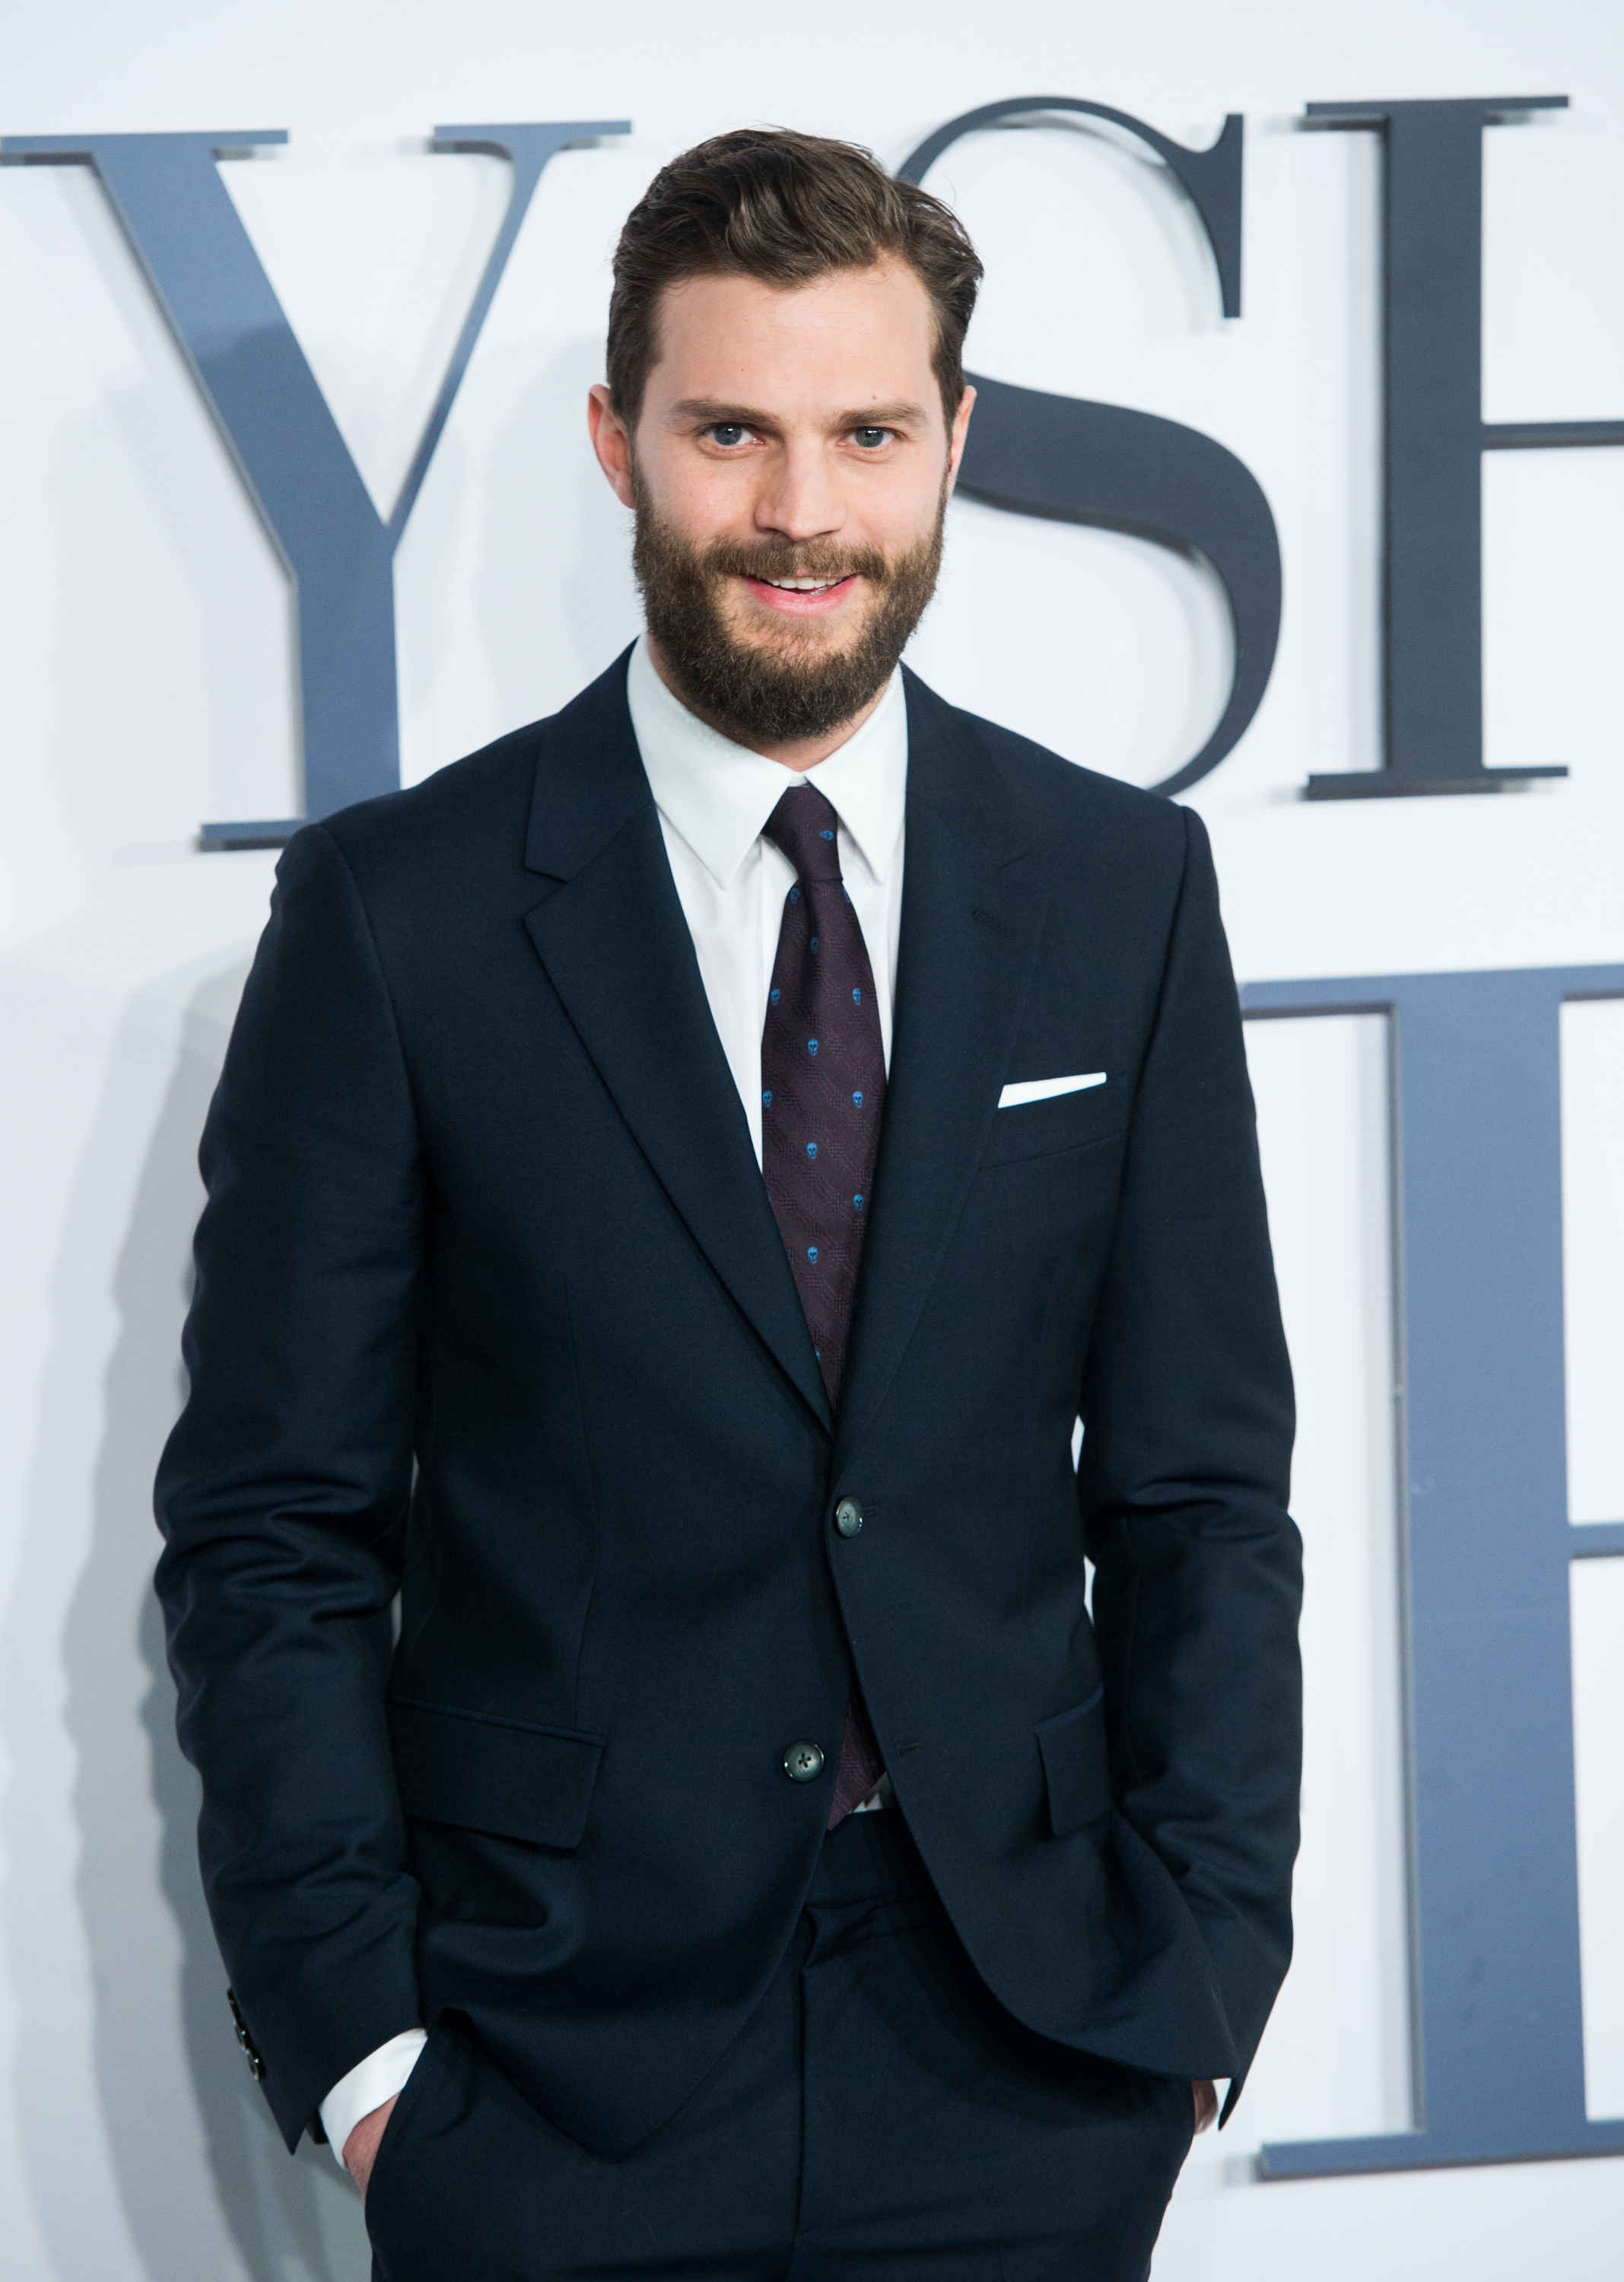 Jamie Dornan attends the UK Premiere of "Fifty Shades Of Grey" at Odeon Leicester Square on Feb 12, 2015 in London. (Samir Hussein—WireImage/Getty Images)